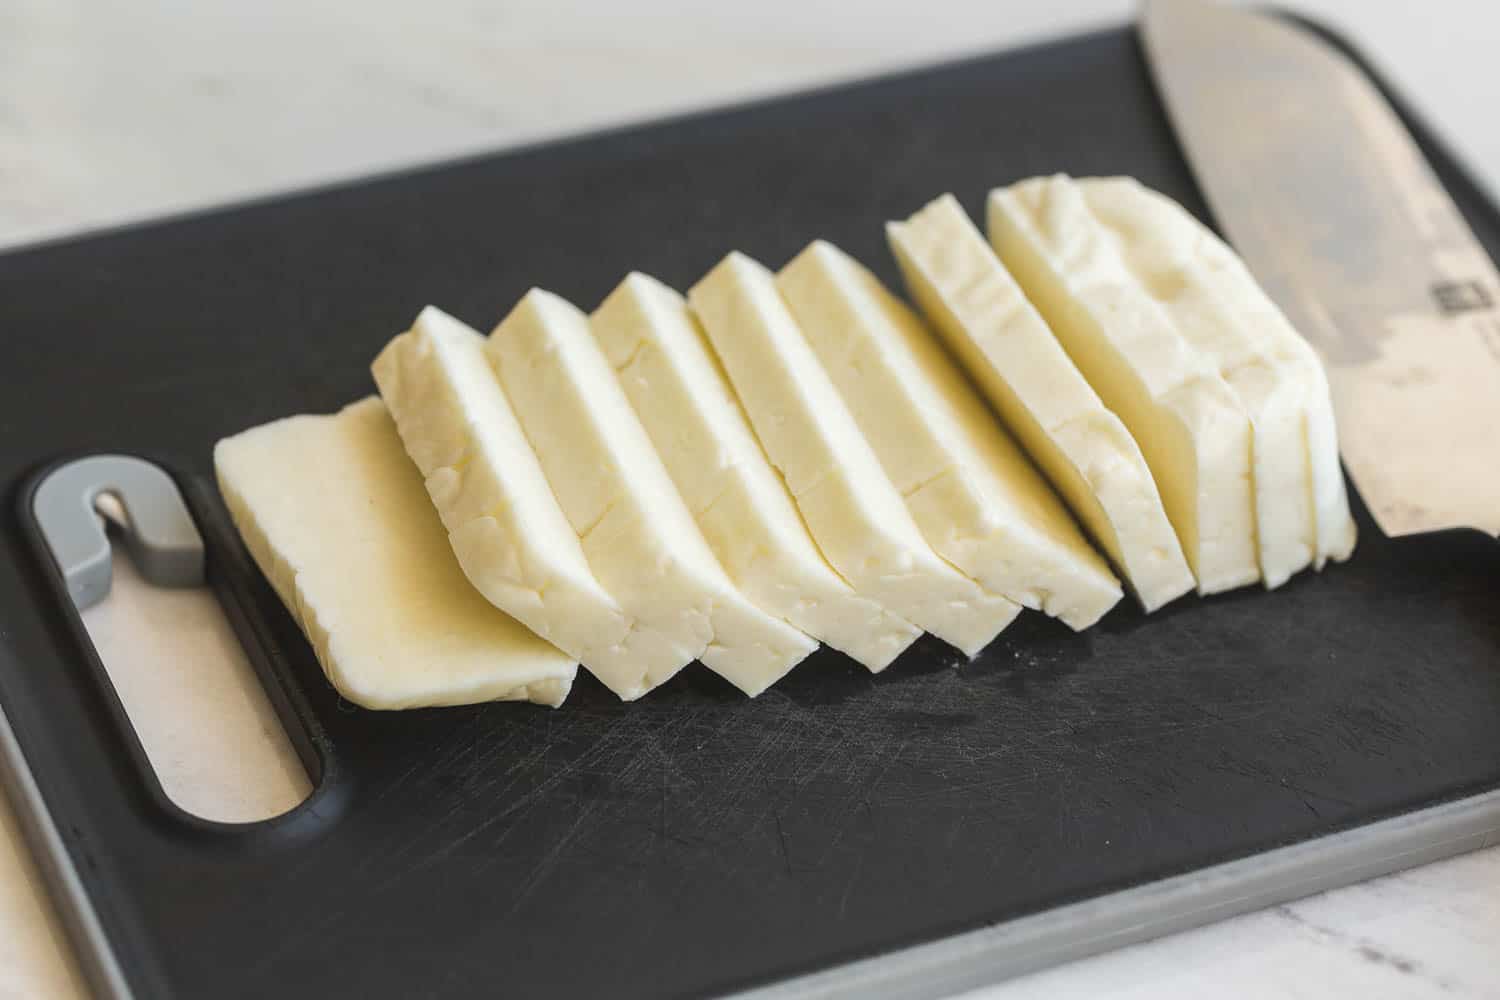 Sliced Halloumi block on a cutting board with a knife